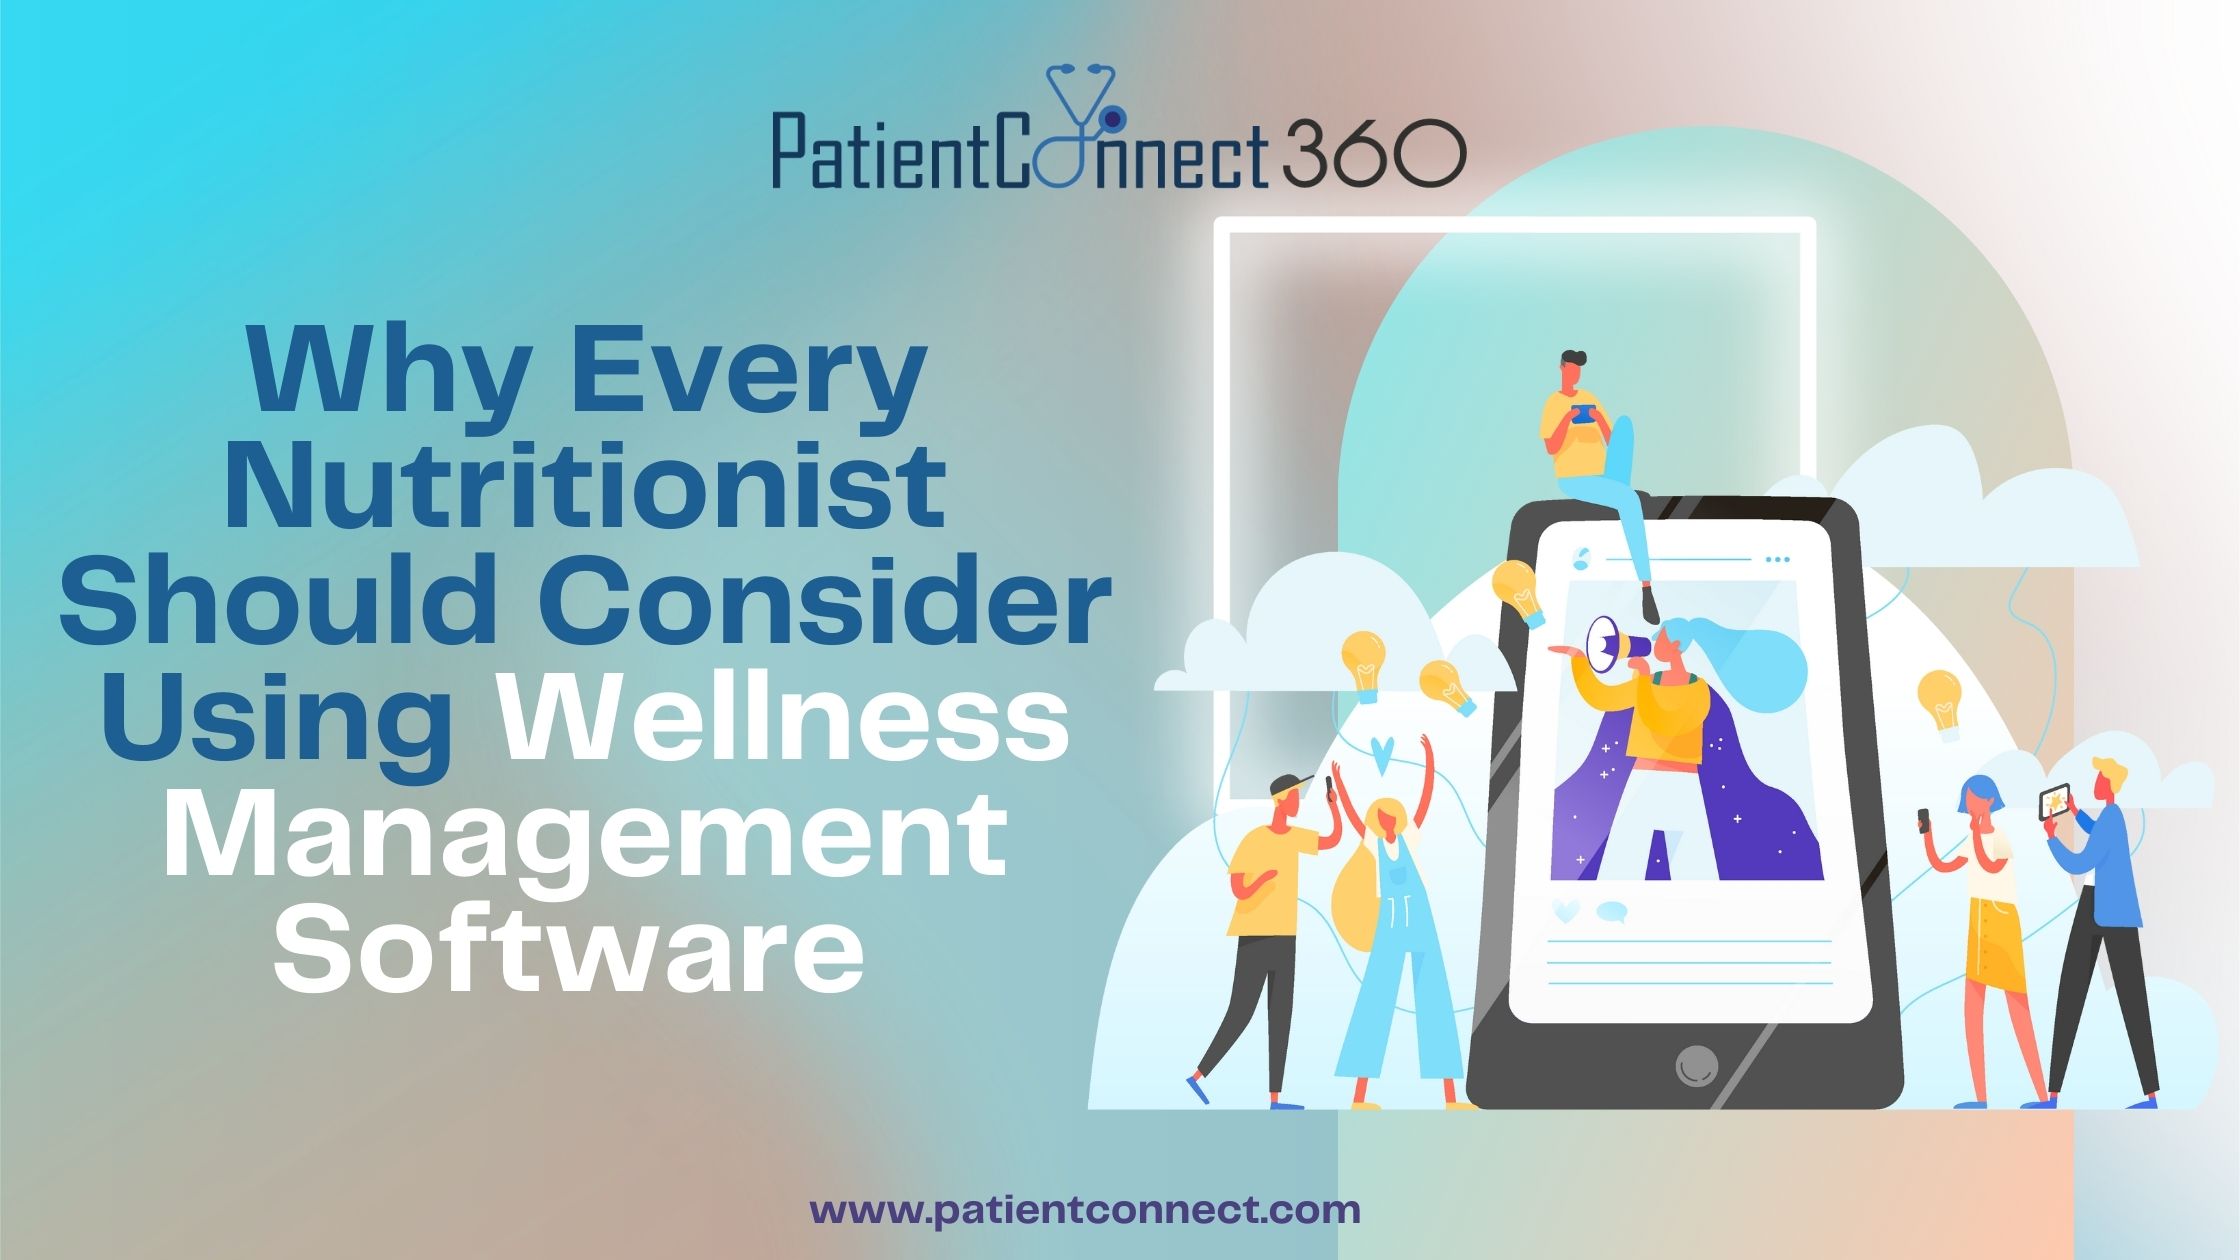 PatiemtCofnest 360

Why Every r
Nutritionist
Should Consider

Using